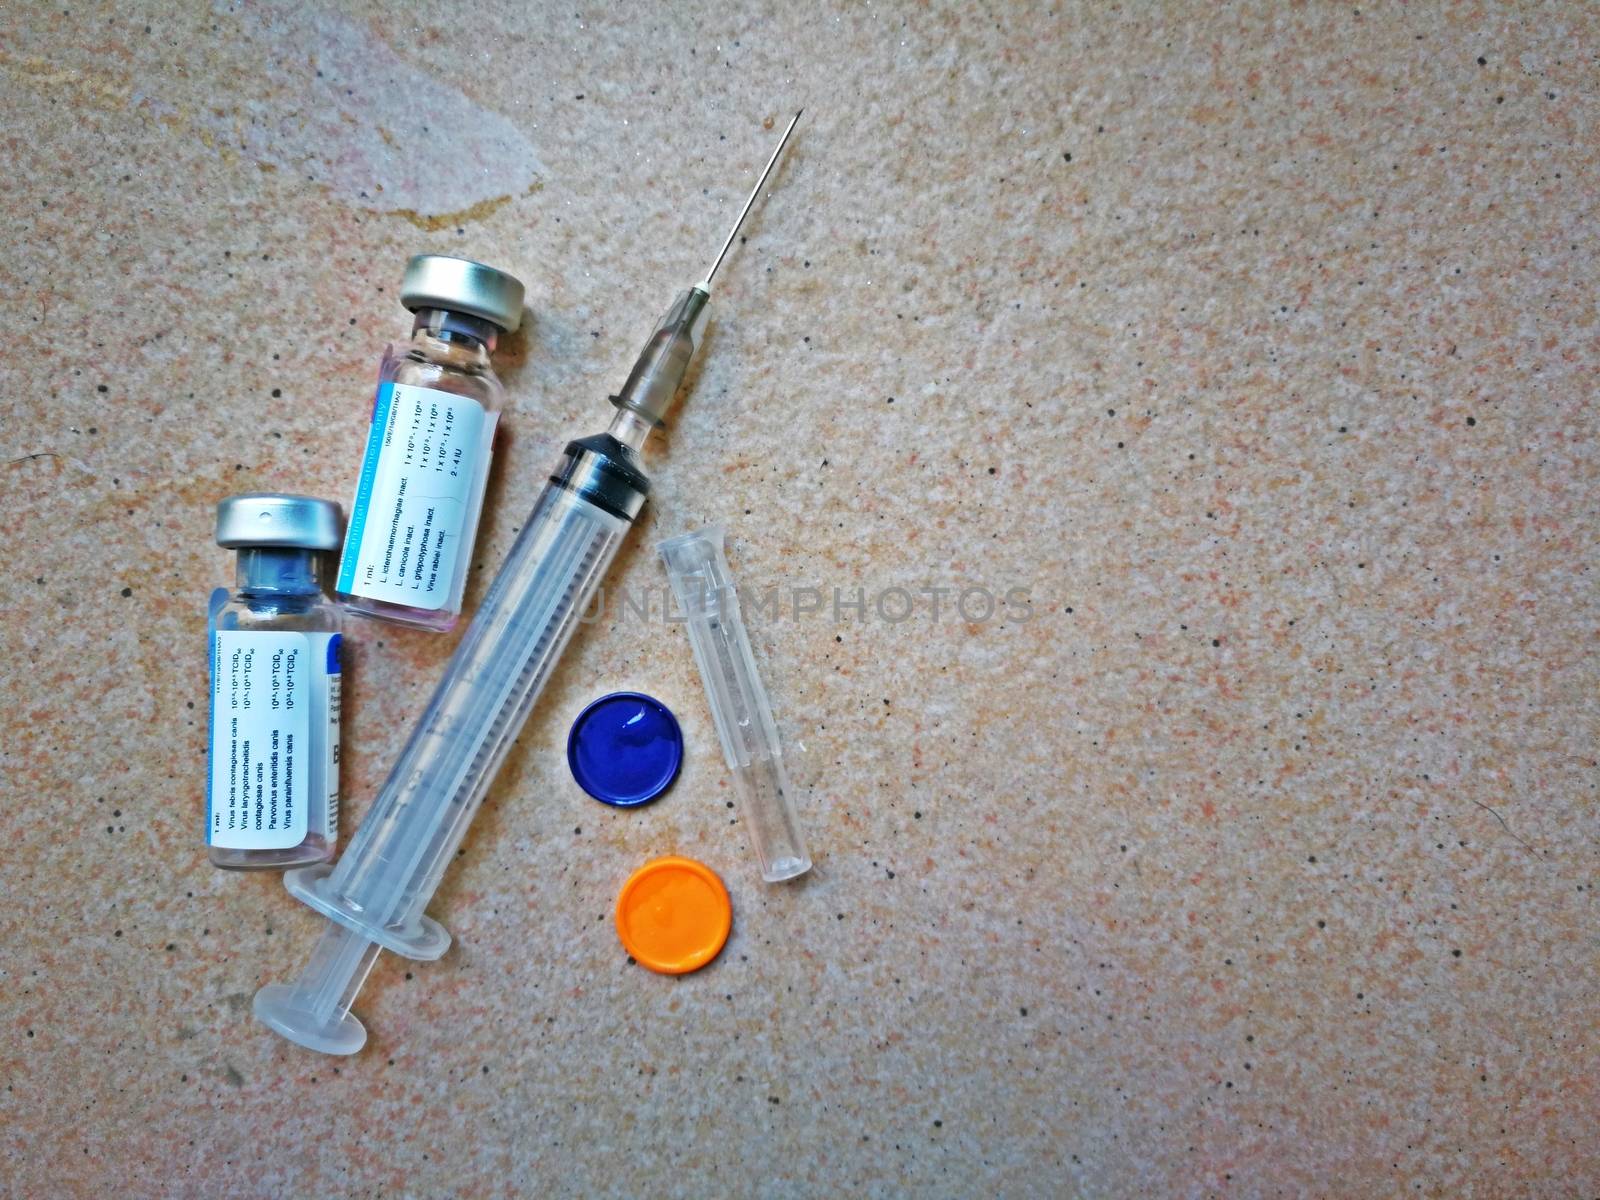 needles and vaccine for protect my dogs from  rabies, hydrophobi by shatchaya